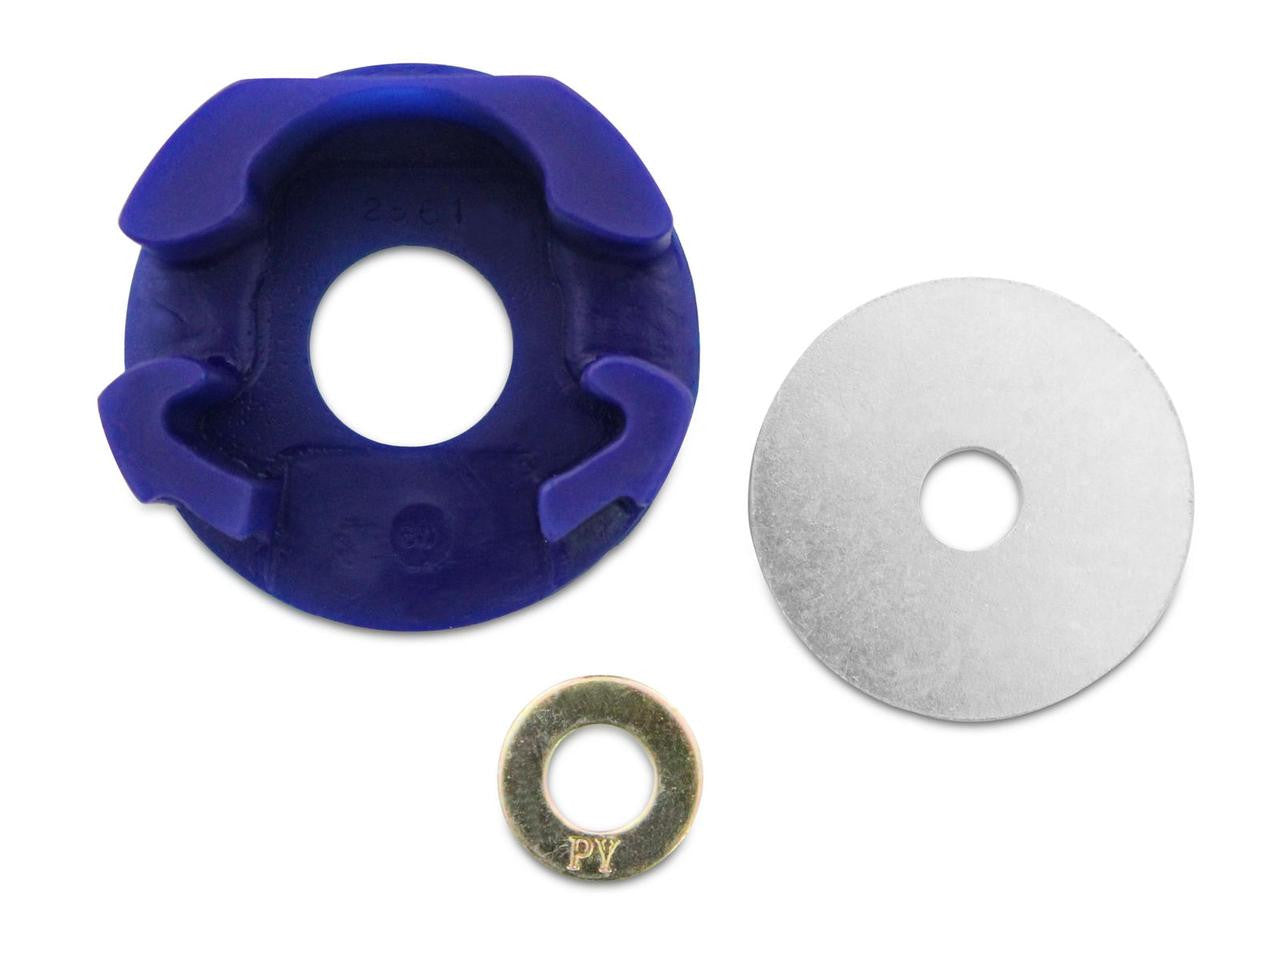 Superpro Front Torque Arm Lower Insert Bush Kit: Fast Road Use - Up to Mid-2008 Models - Golf MK5 2WD+4WD